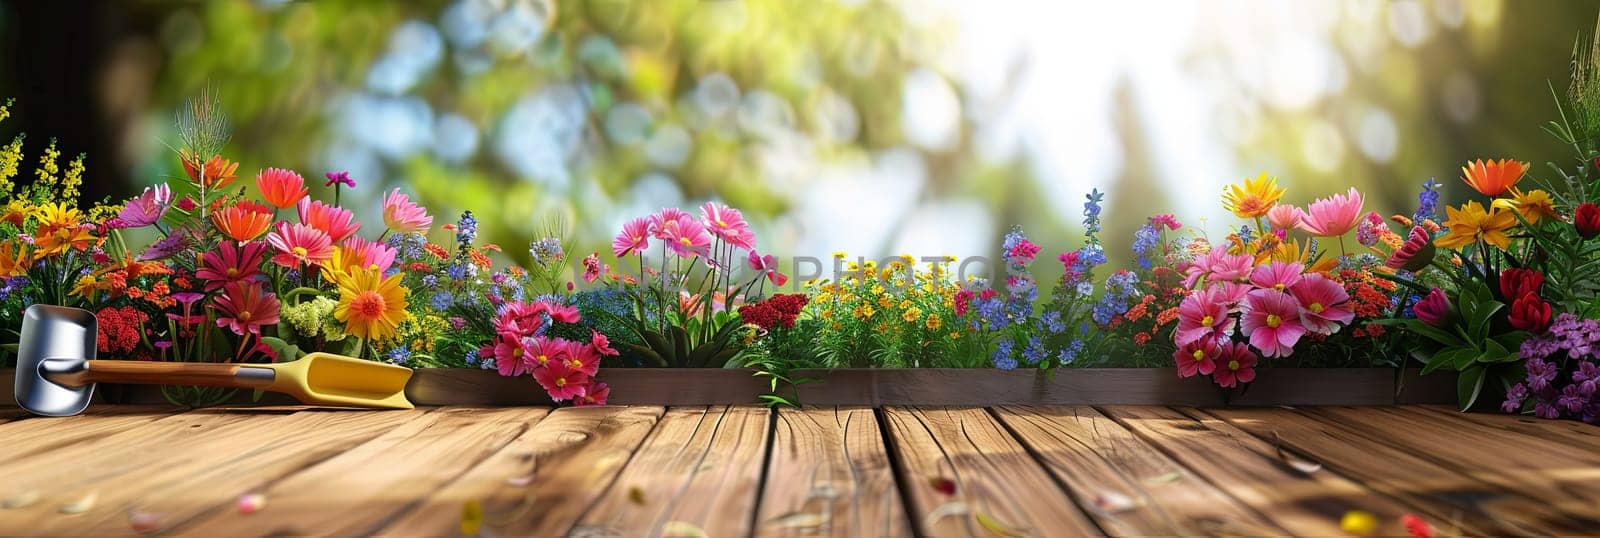 A wooden table adorned with an assortment of vibrant flowers, set against a blurred garden backdrop.